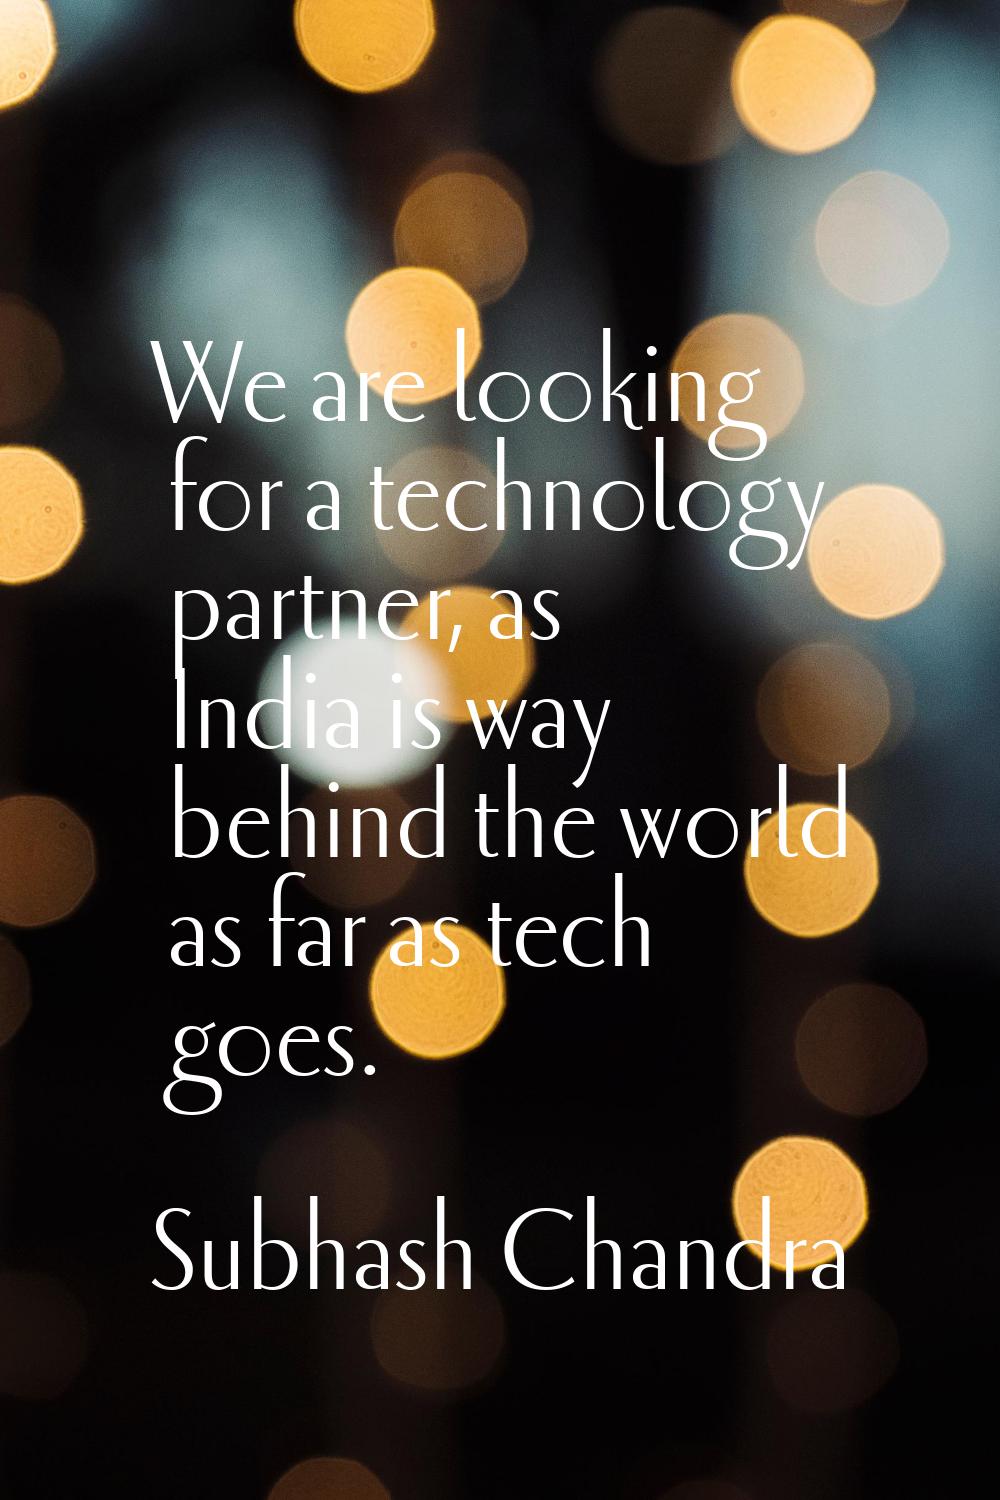 We are looking for a technology partner, as India is way behind the world as far as tech goes.